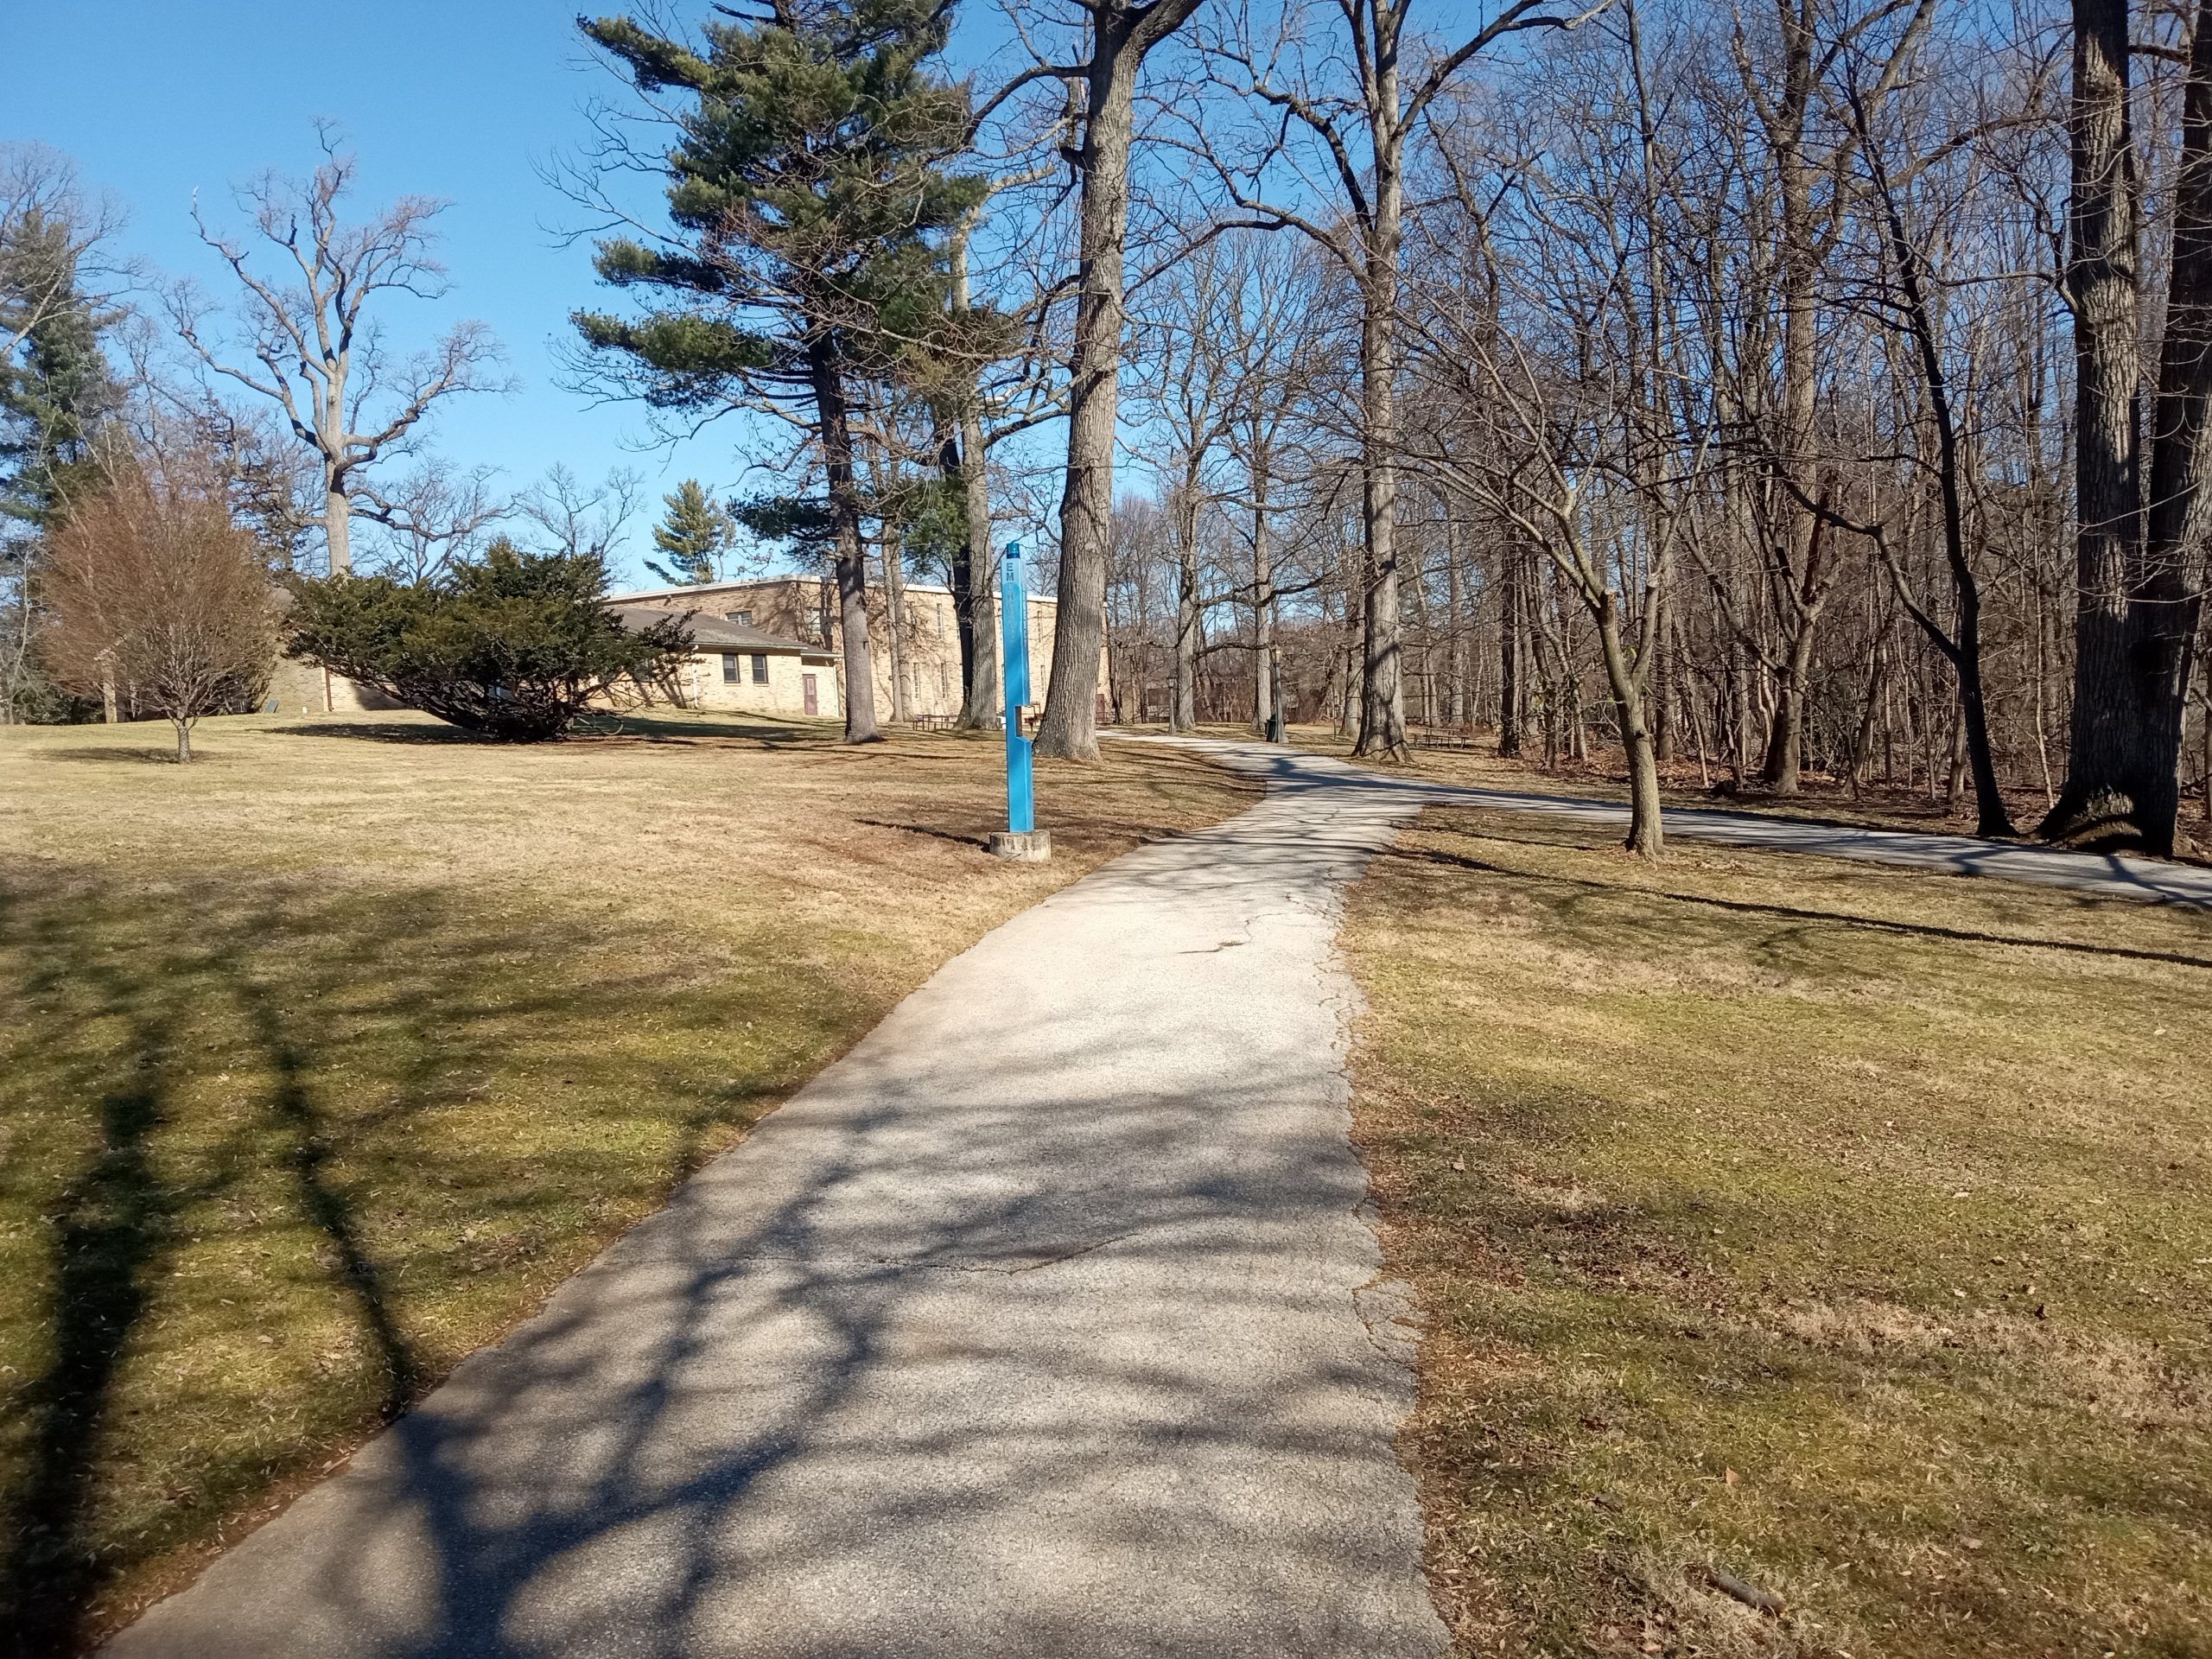 A concrete pathway in the middle of bare trees and dead grass.